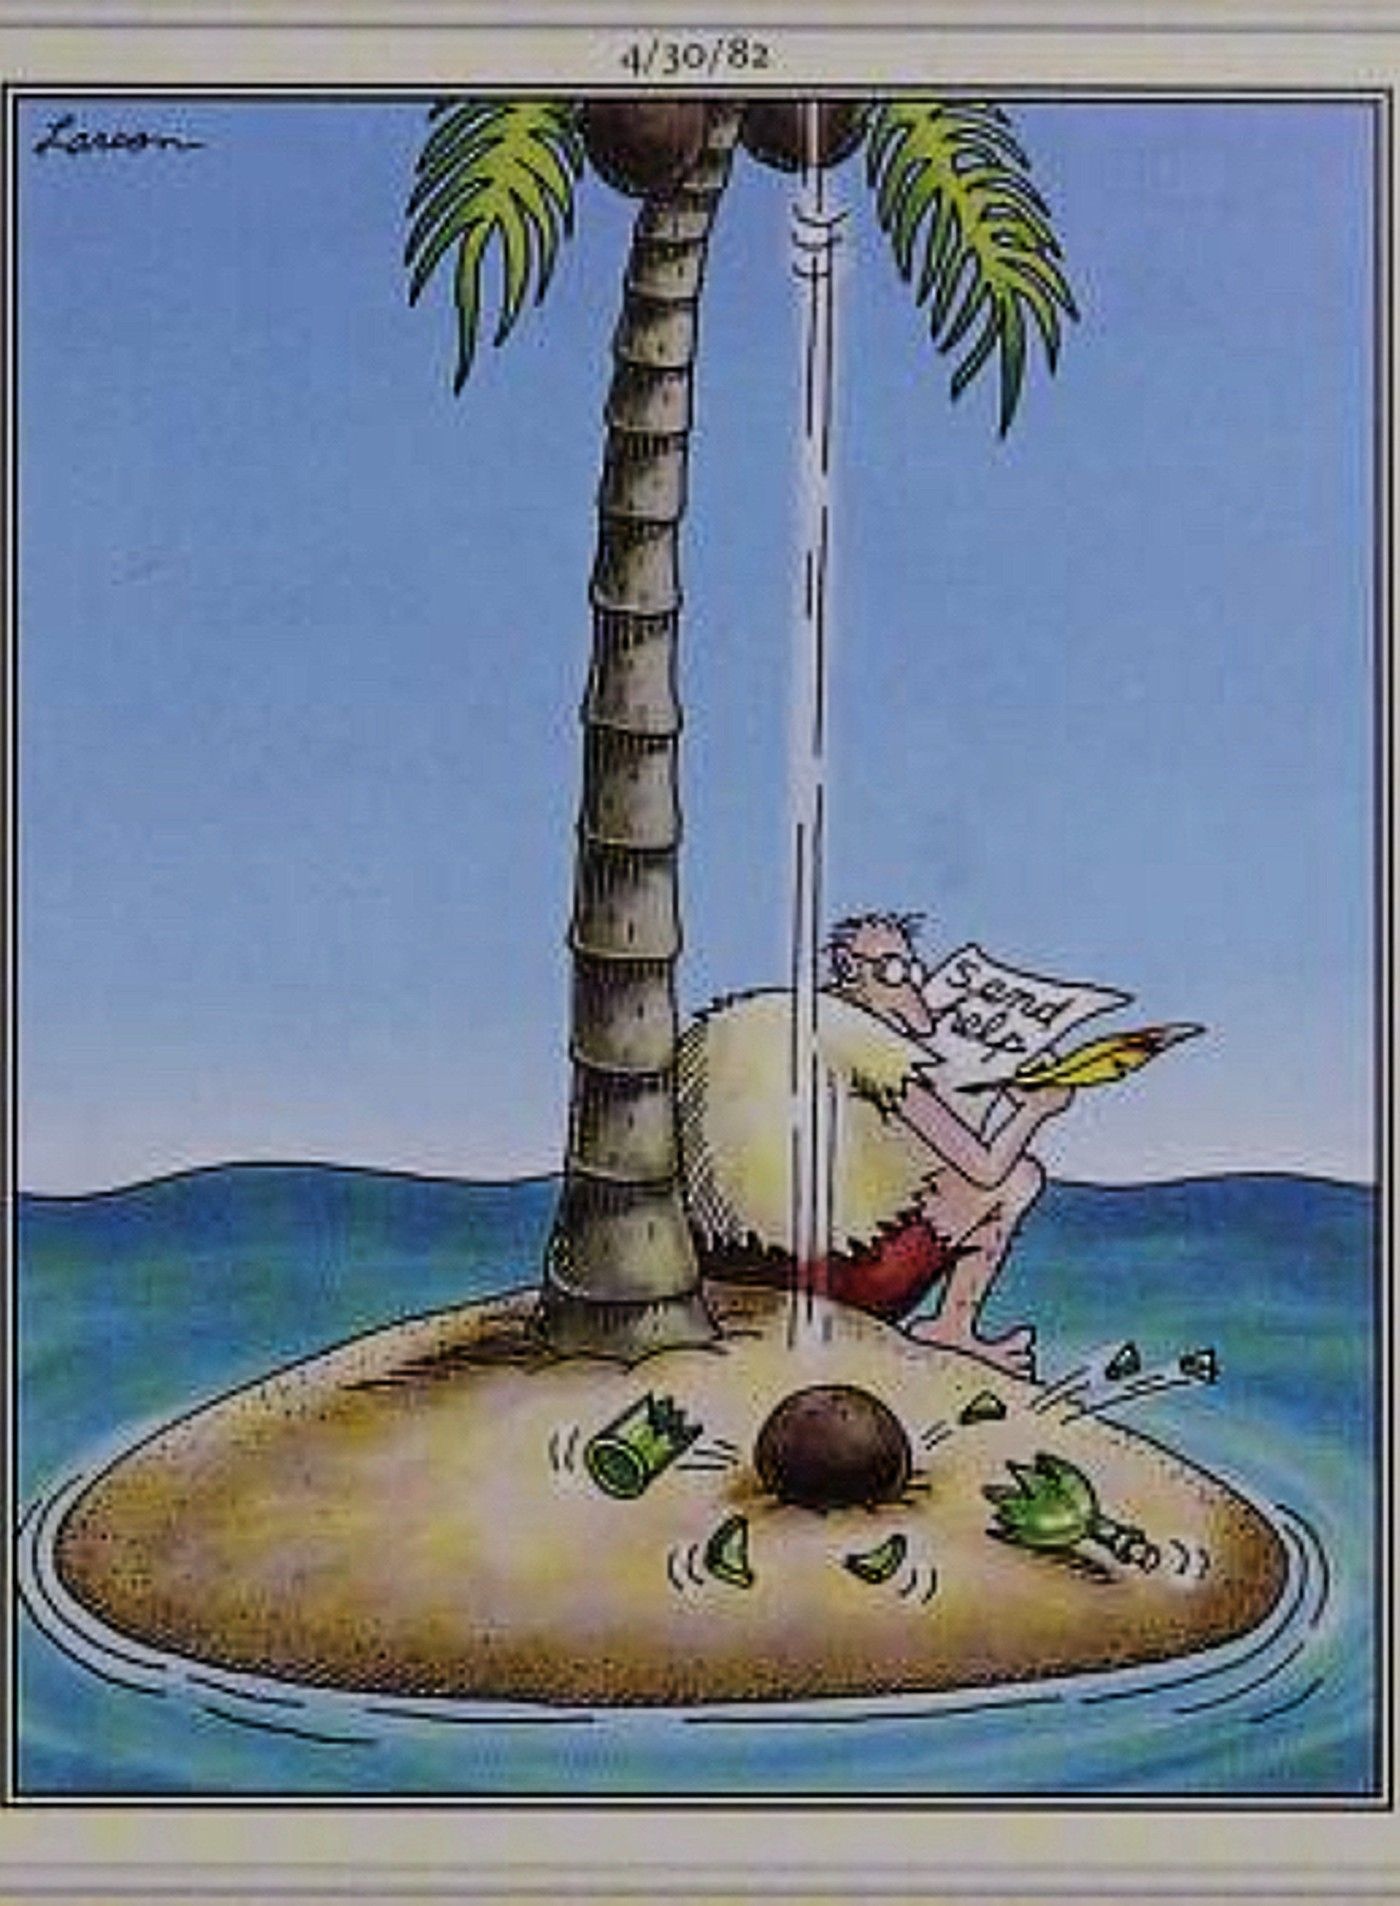 Far Side, coconut falls out of tree and smashes bottle before man on desert island can finish writing note